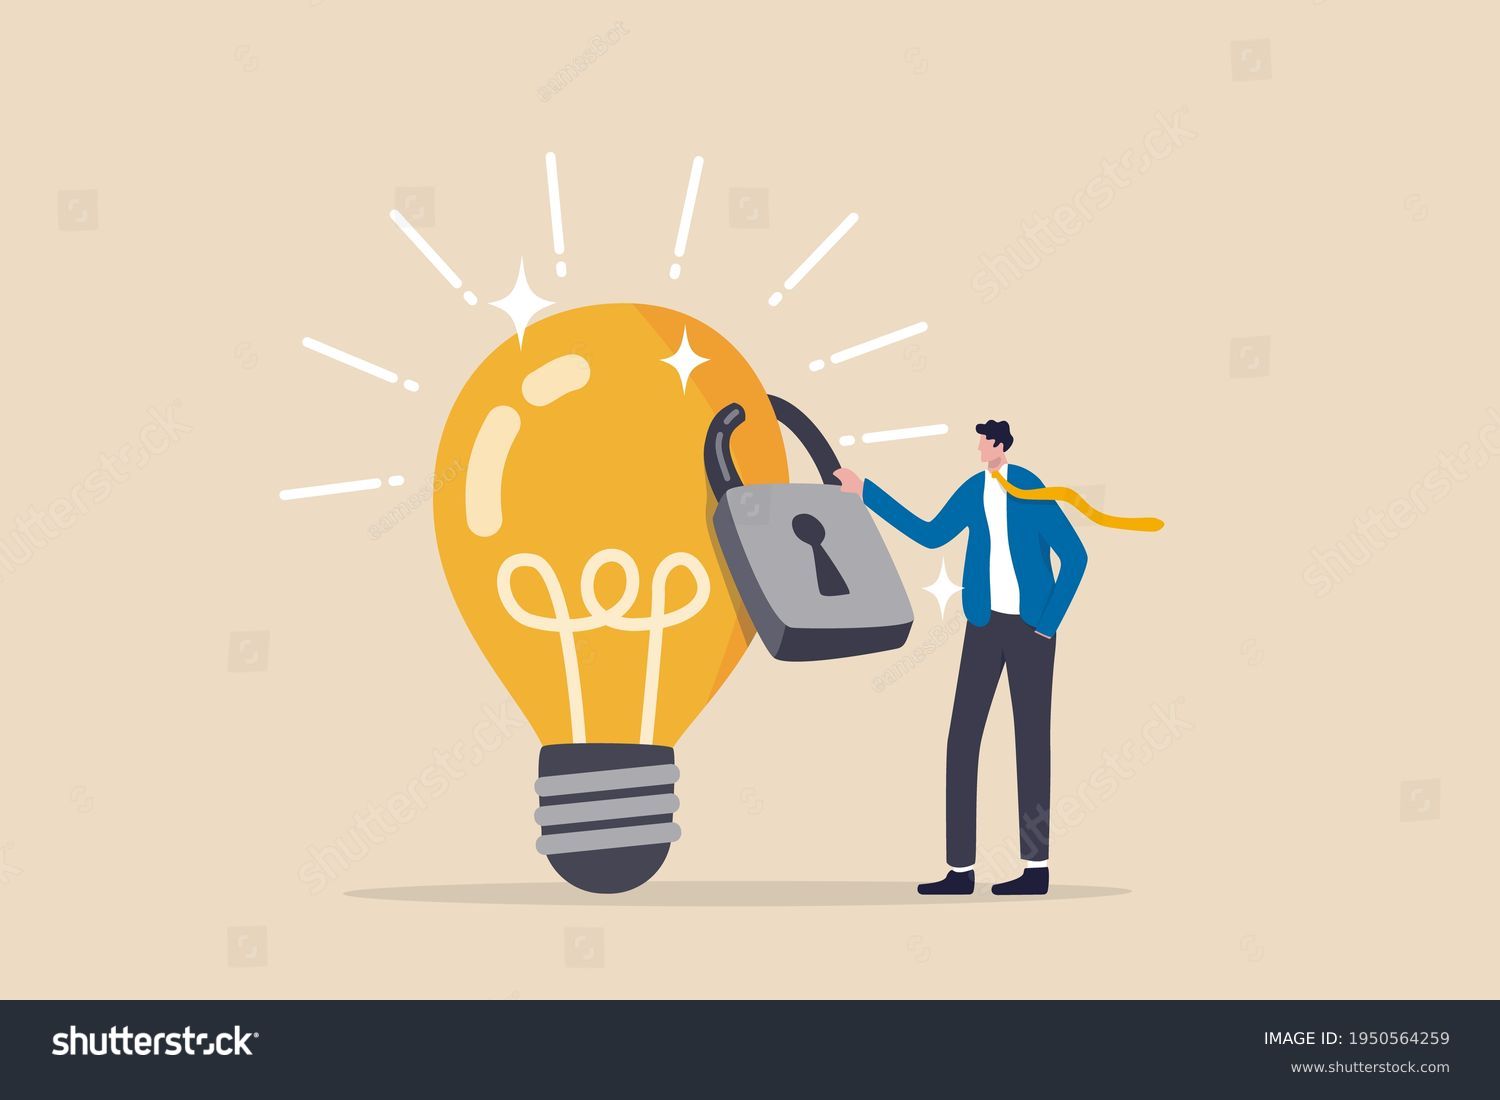 Intellectual property, patented protection, copyright reserved or product trademark that cannot copy concept, businessman owner standing with light bulb idea locked with padlock for patents. #1950564259